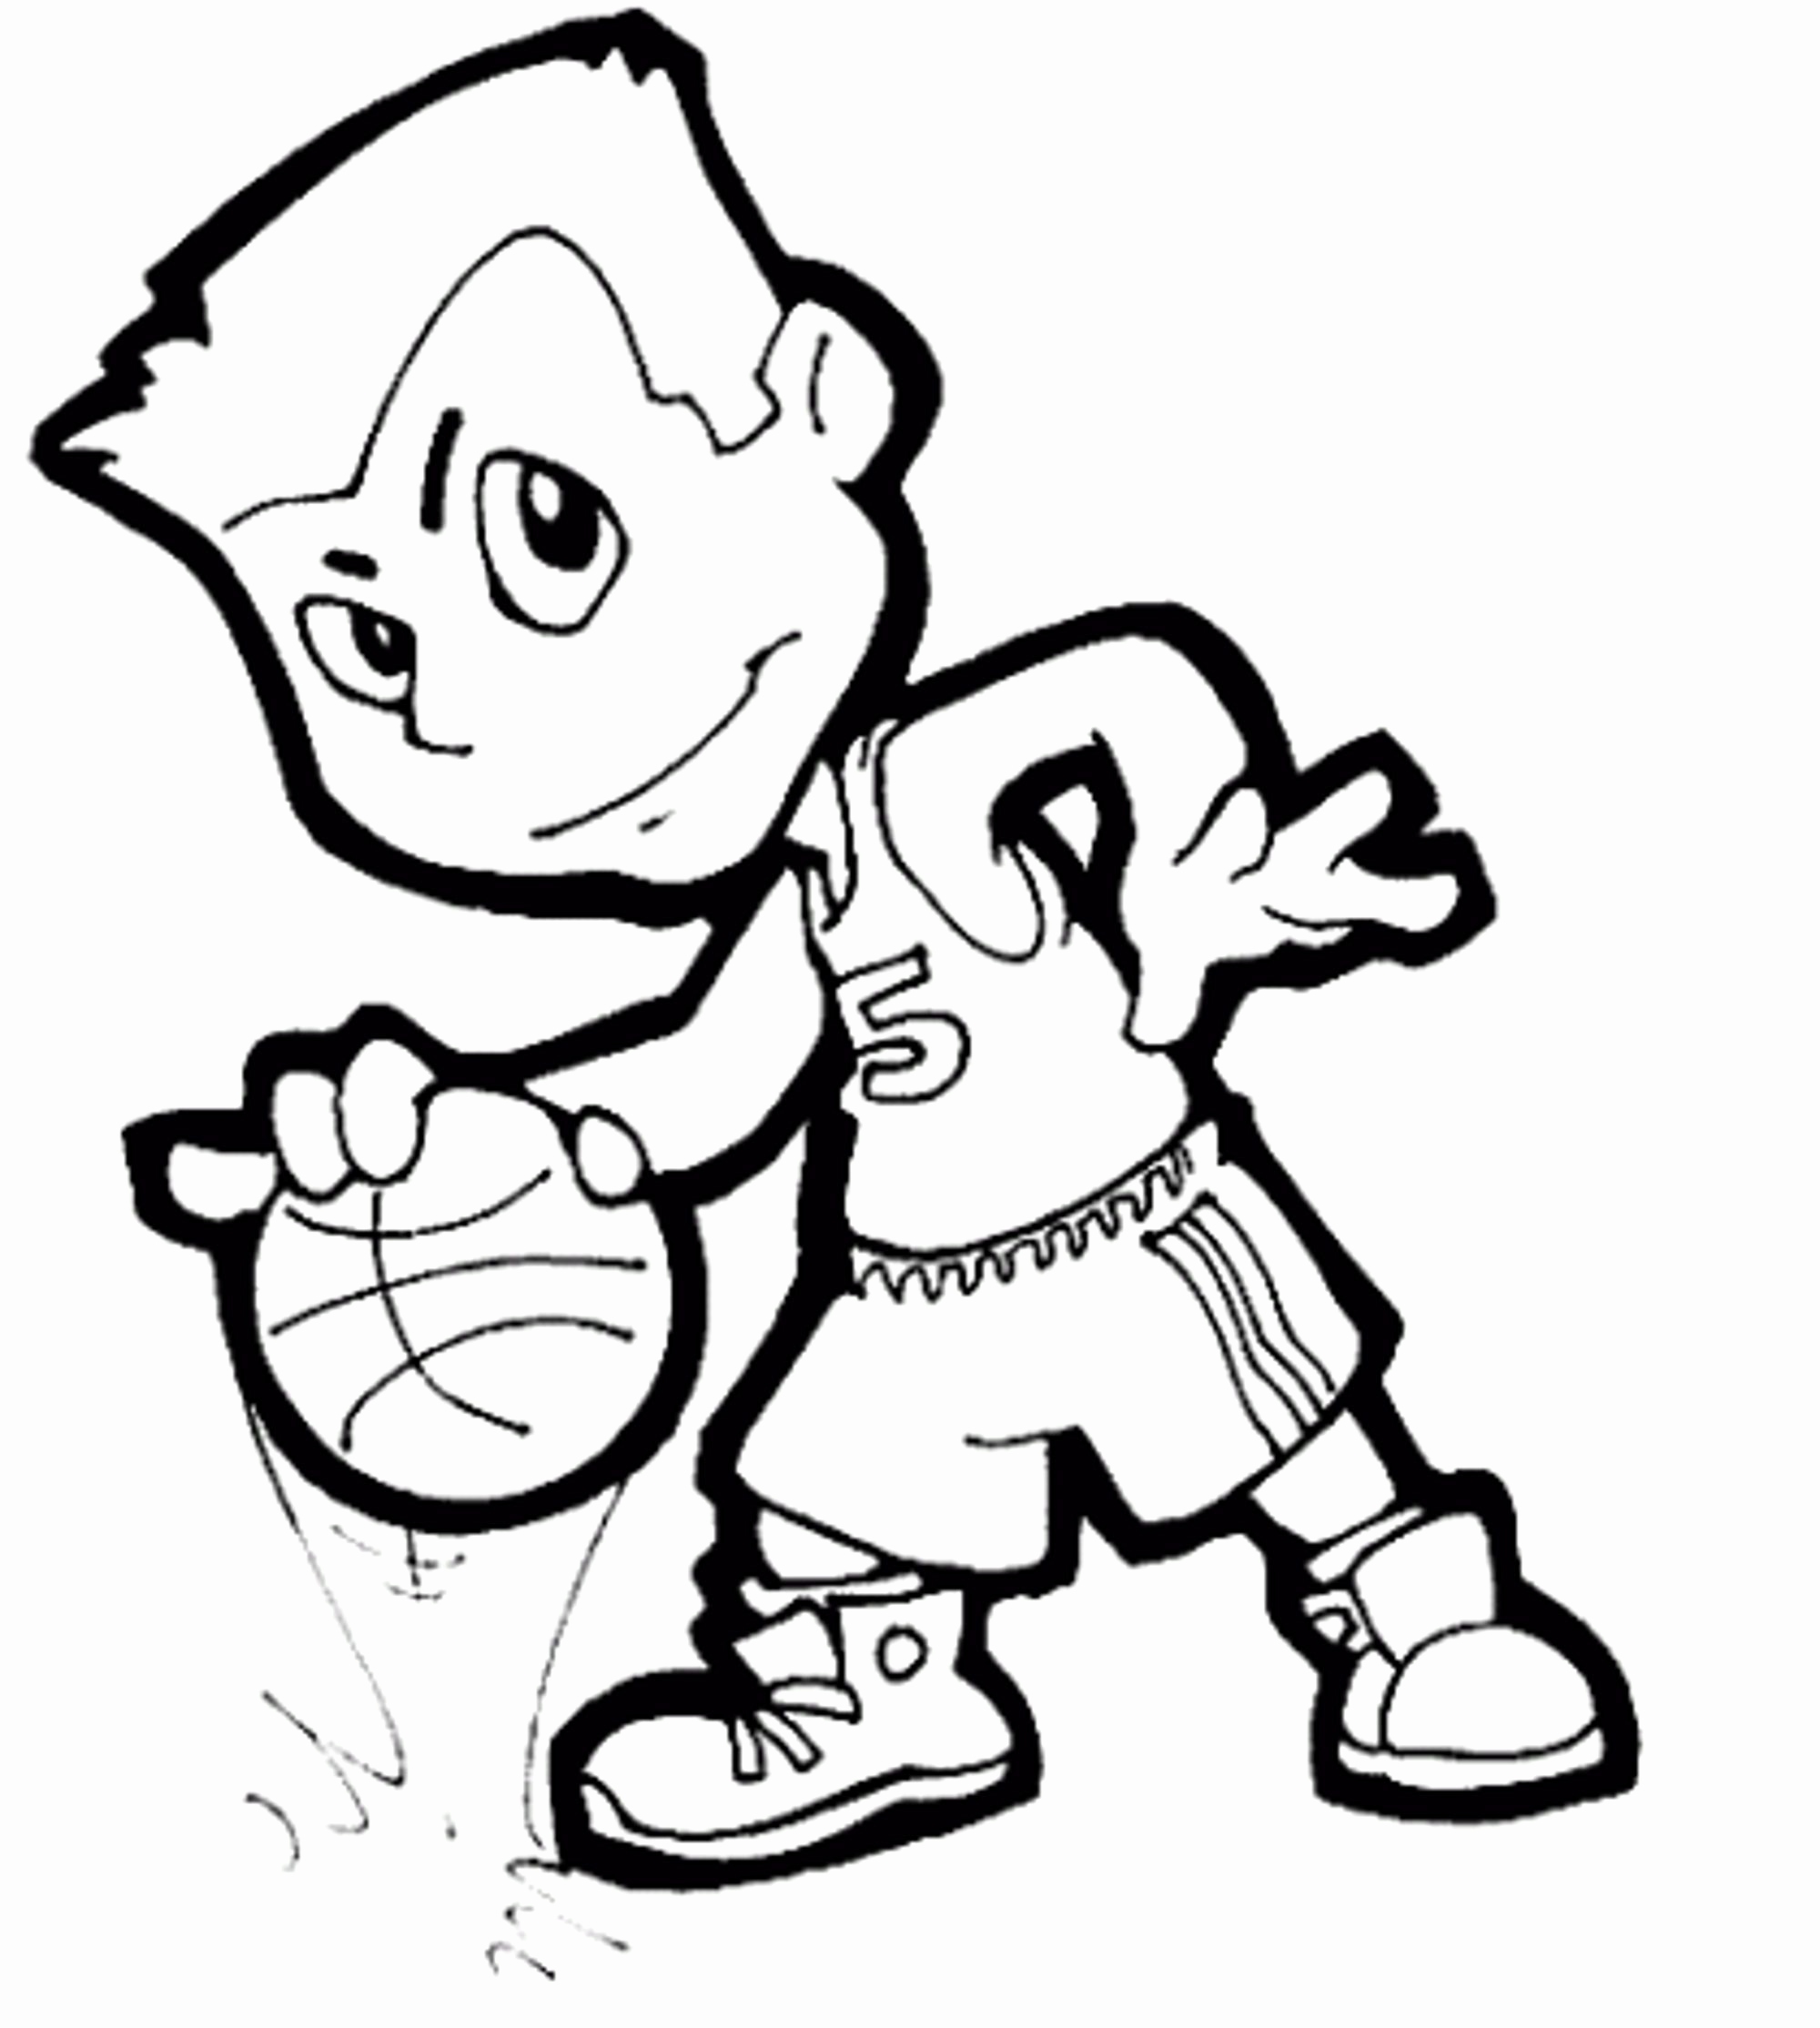 Boston Celtics Coloring Pages at Free printable